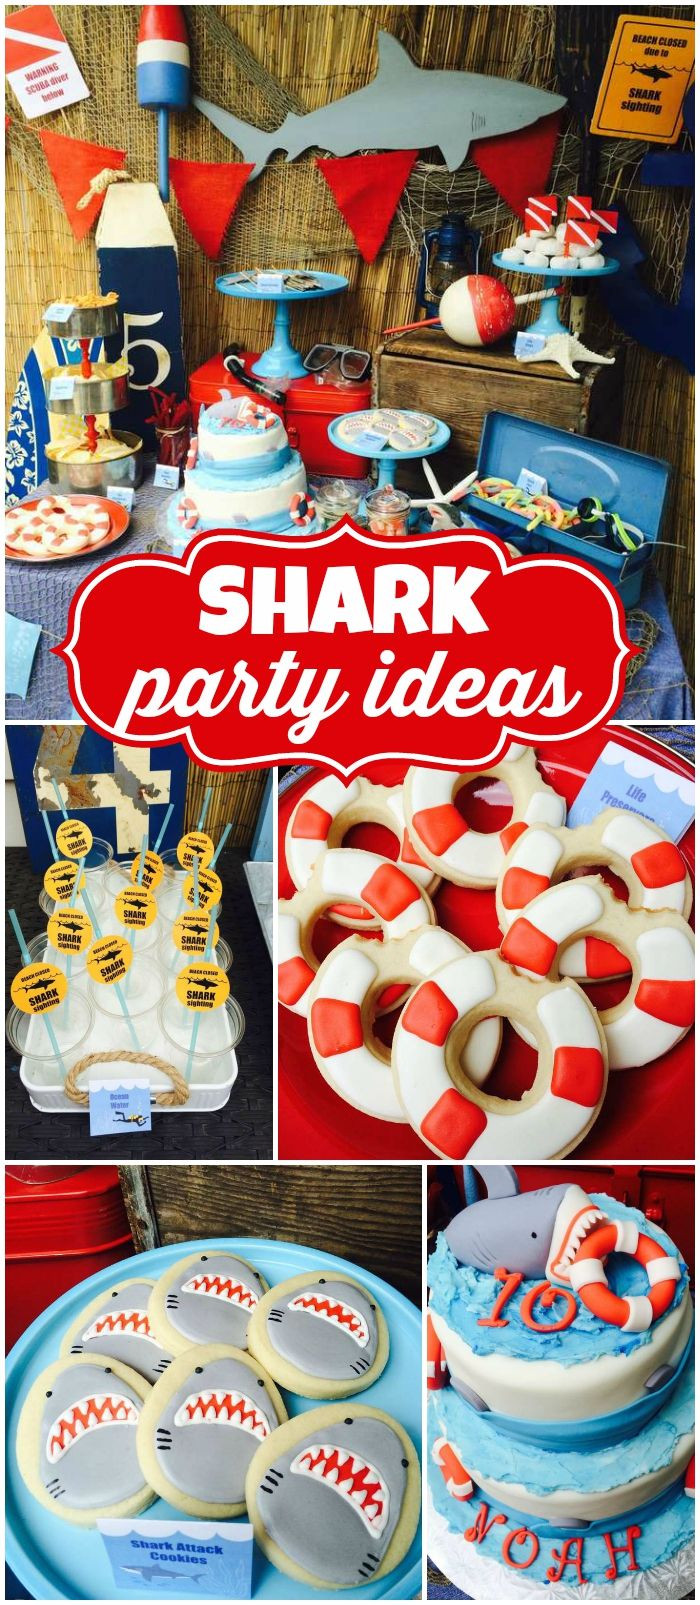 Boy Summer Birthday Party Ideas
 How cool is this shark themed party Perfect for summer